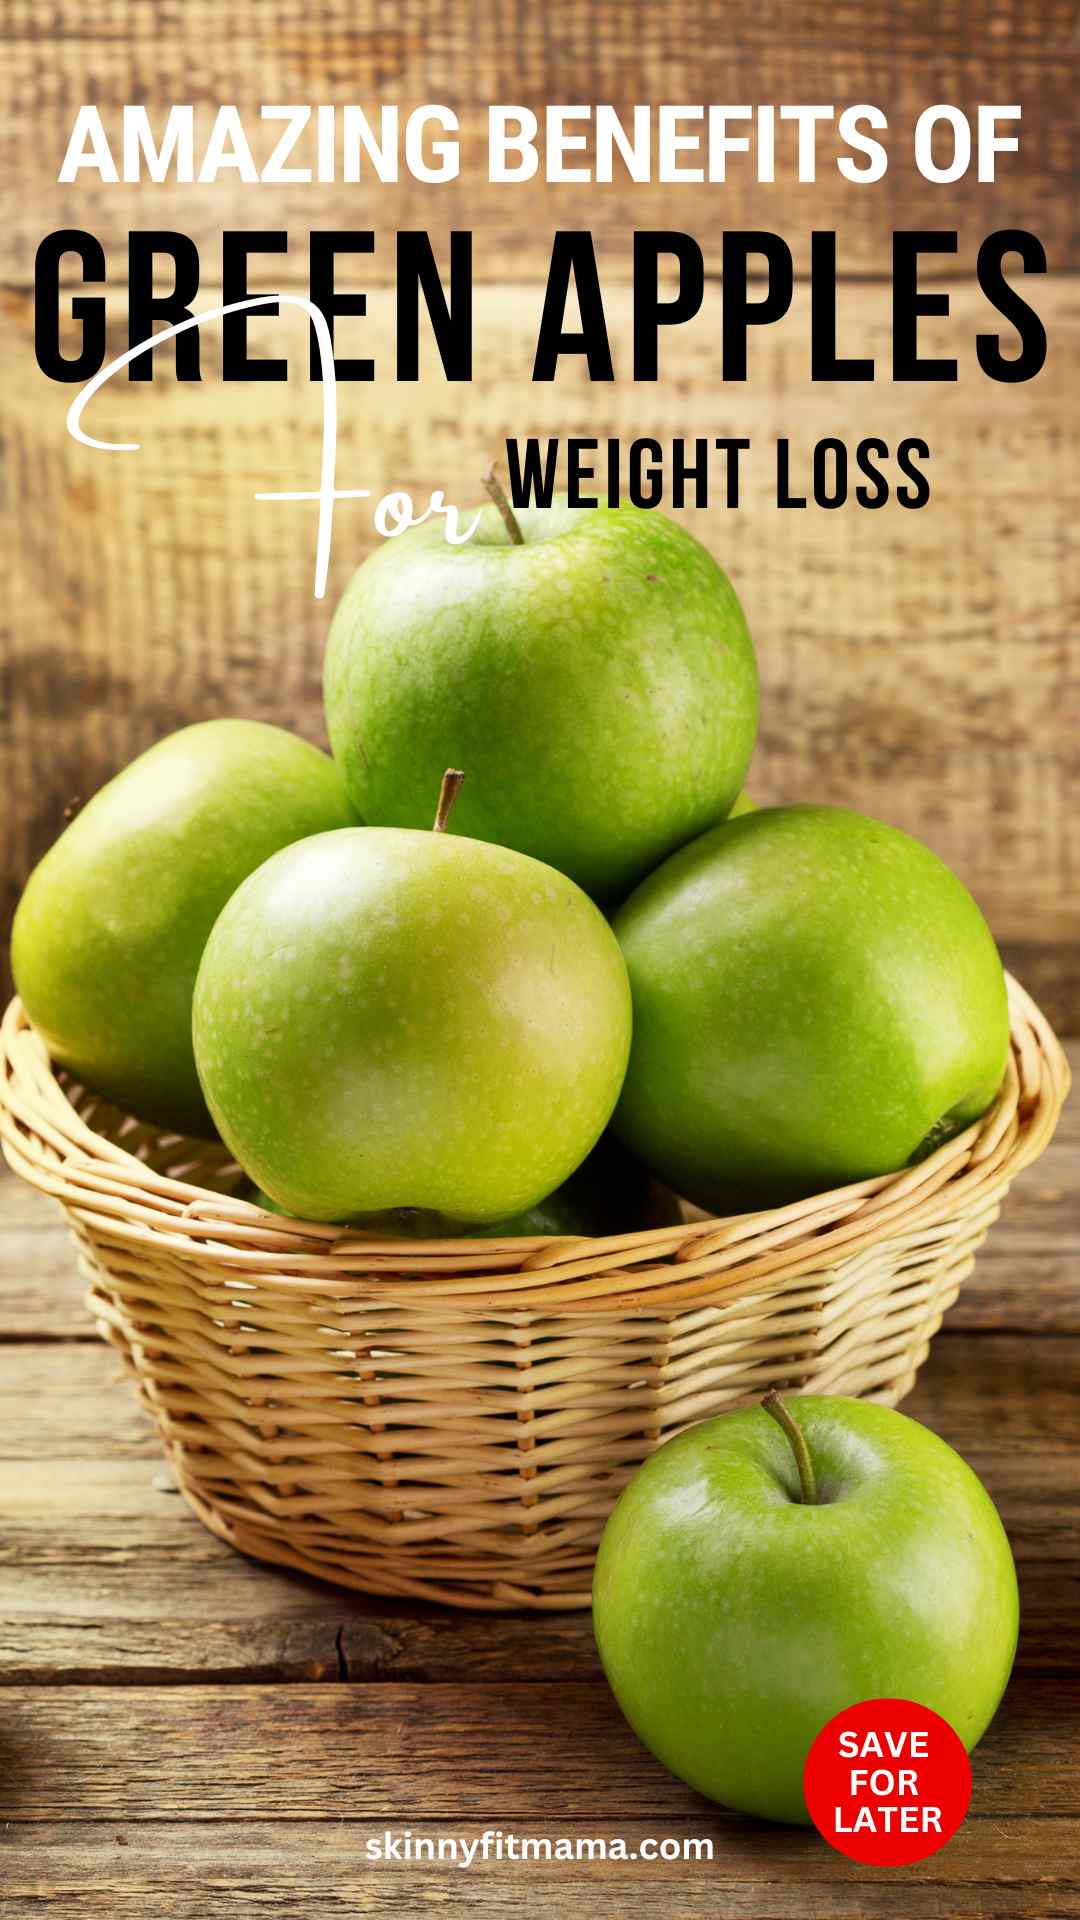 Benefits Of Green Apples For Weight Loss